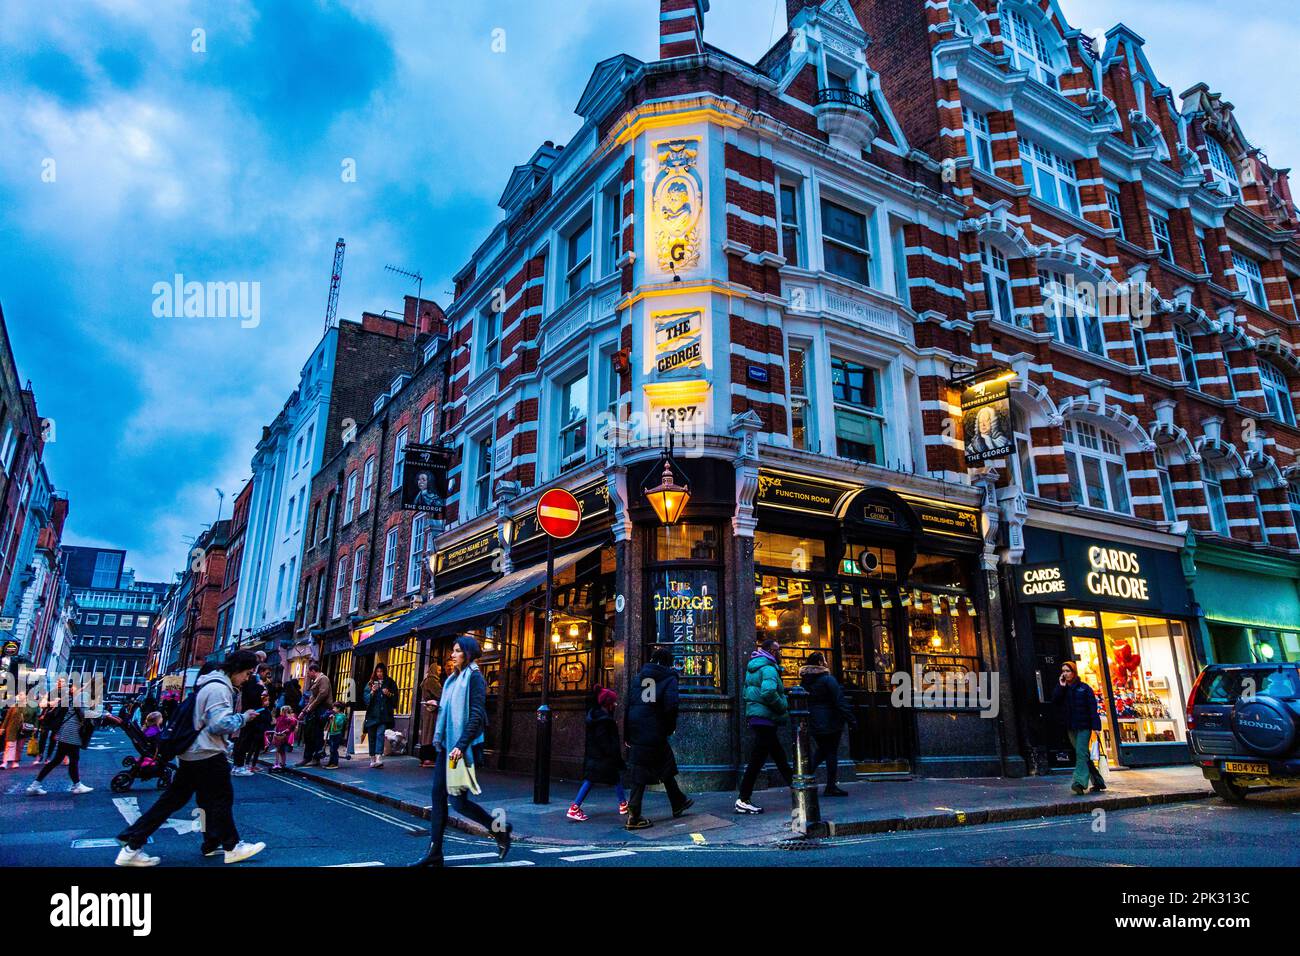 Exterior of Victorian style 18th century pub The George in Soho at night, London, UK Stock Photo